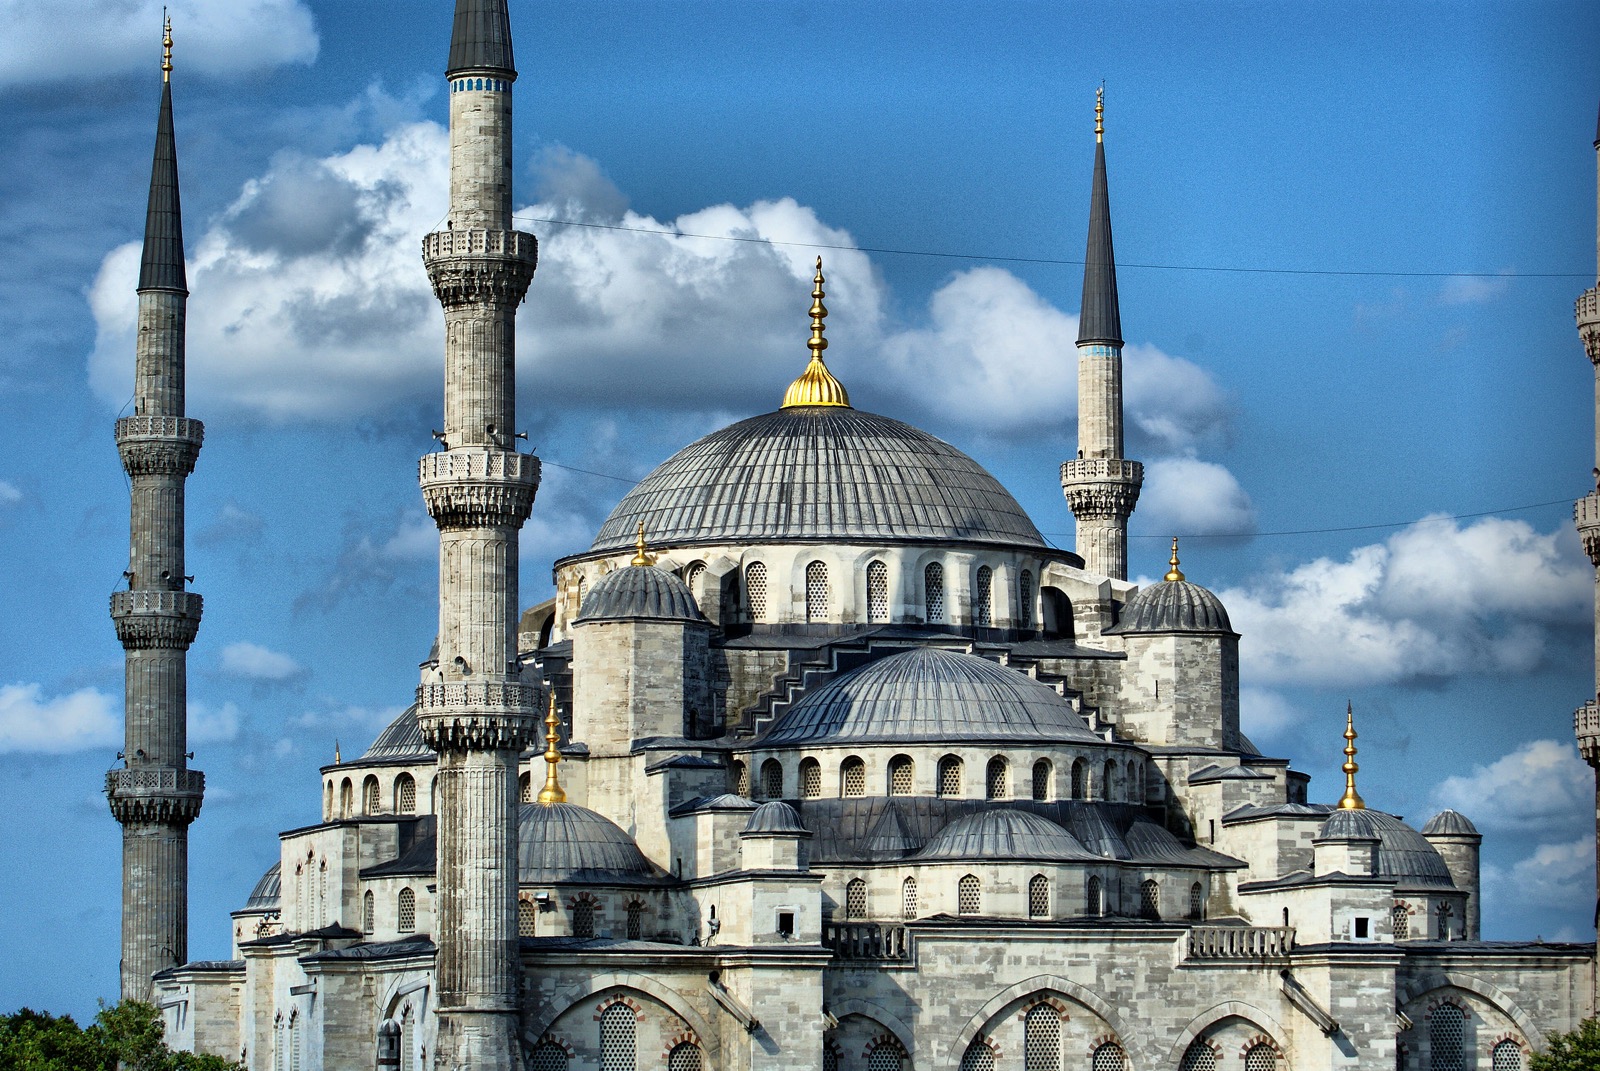 Second Most Famous Sights Blue Mosque, Istanbul, Turkey